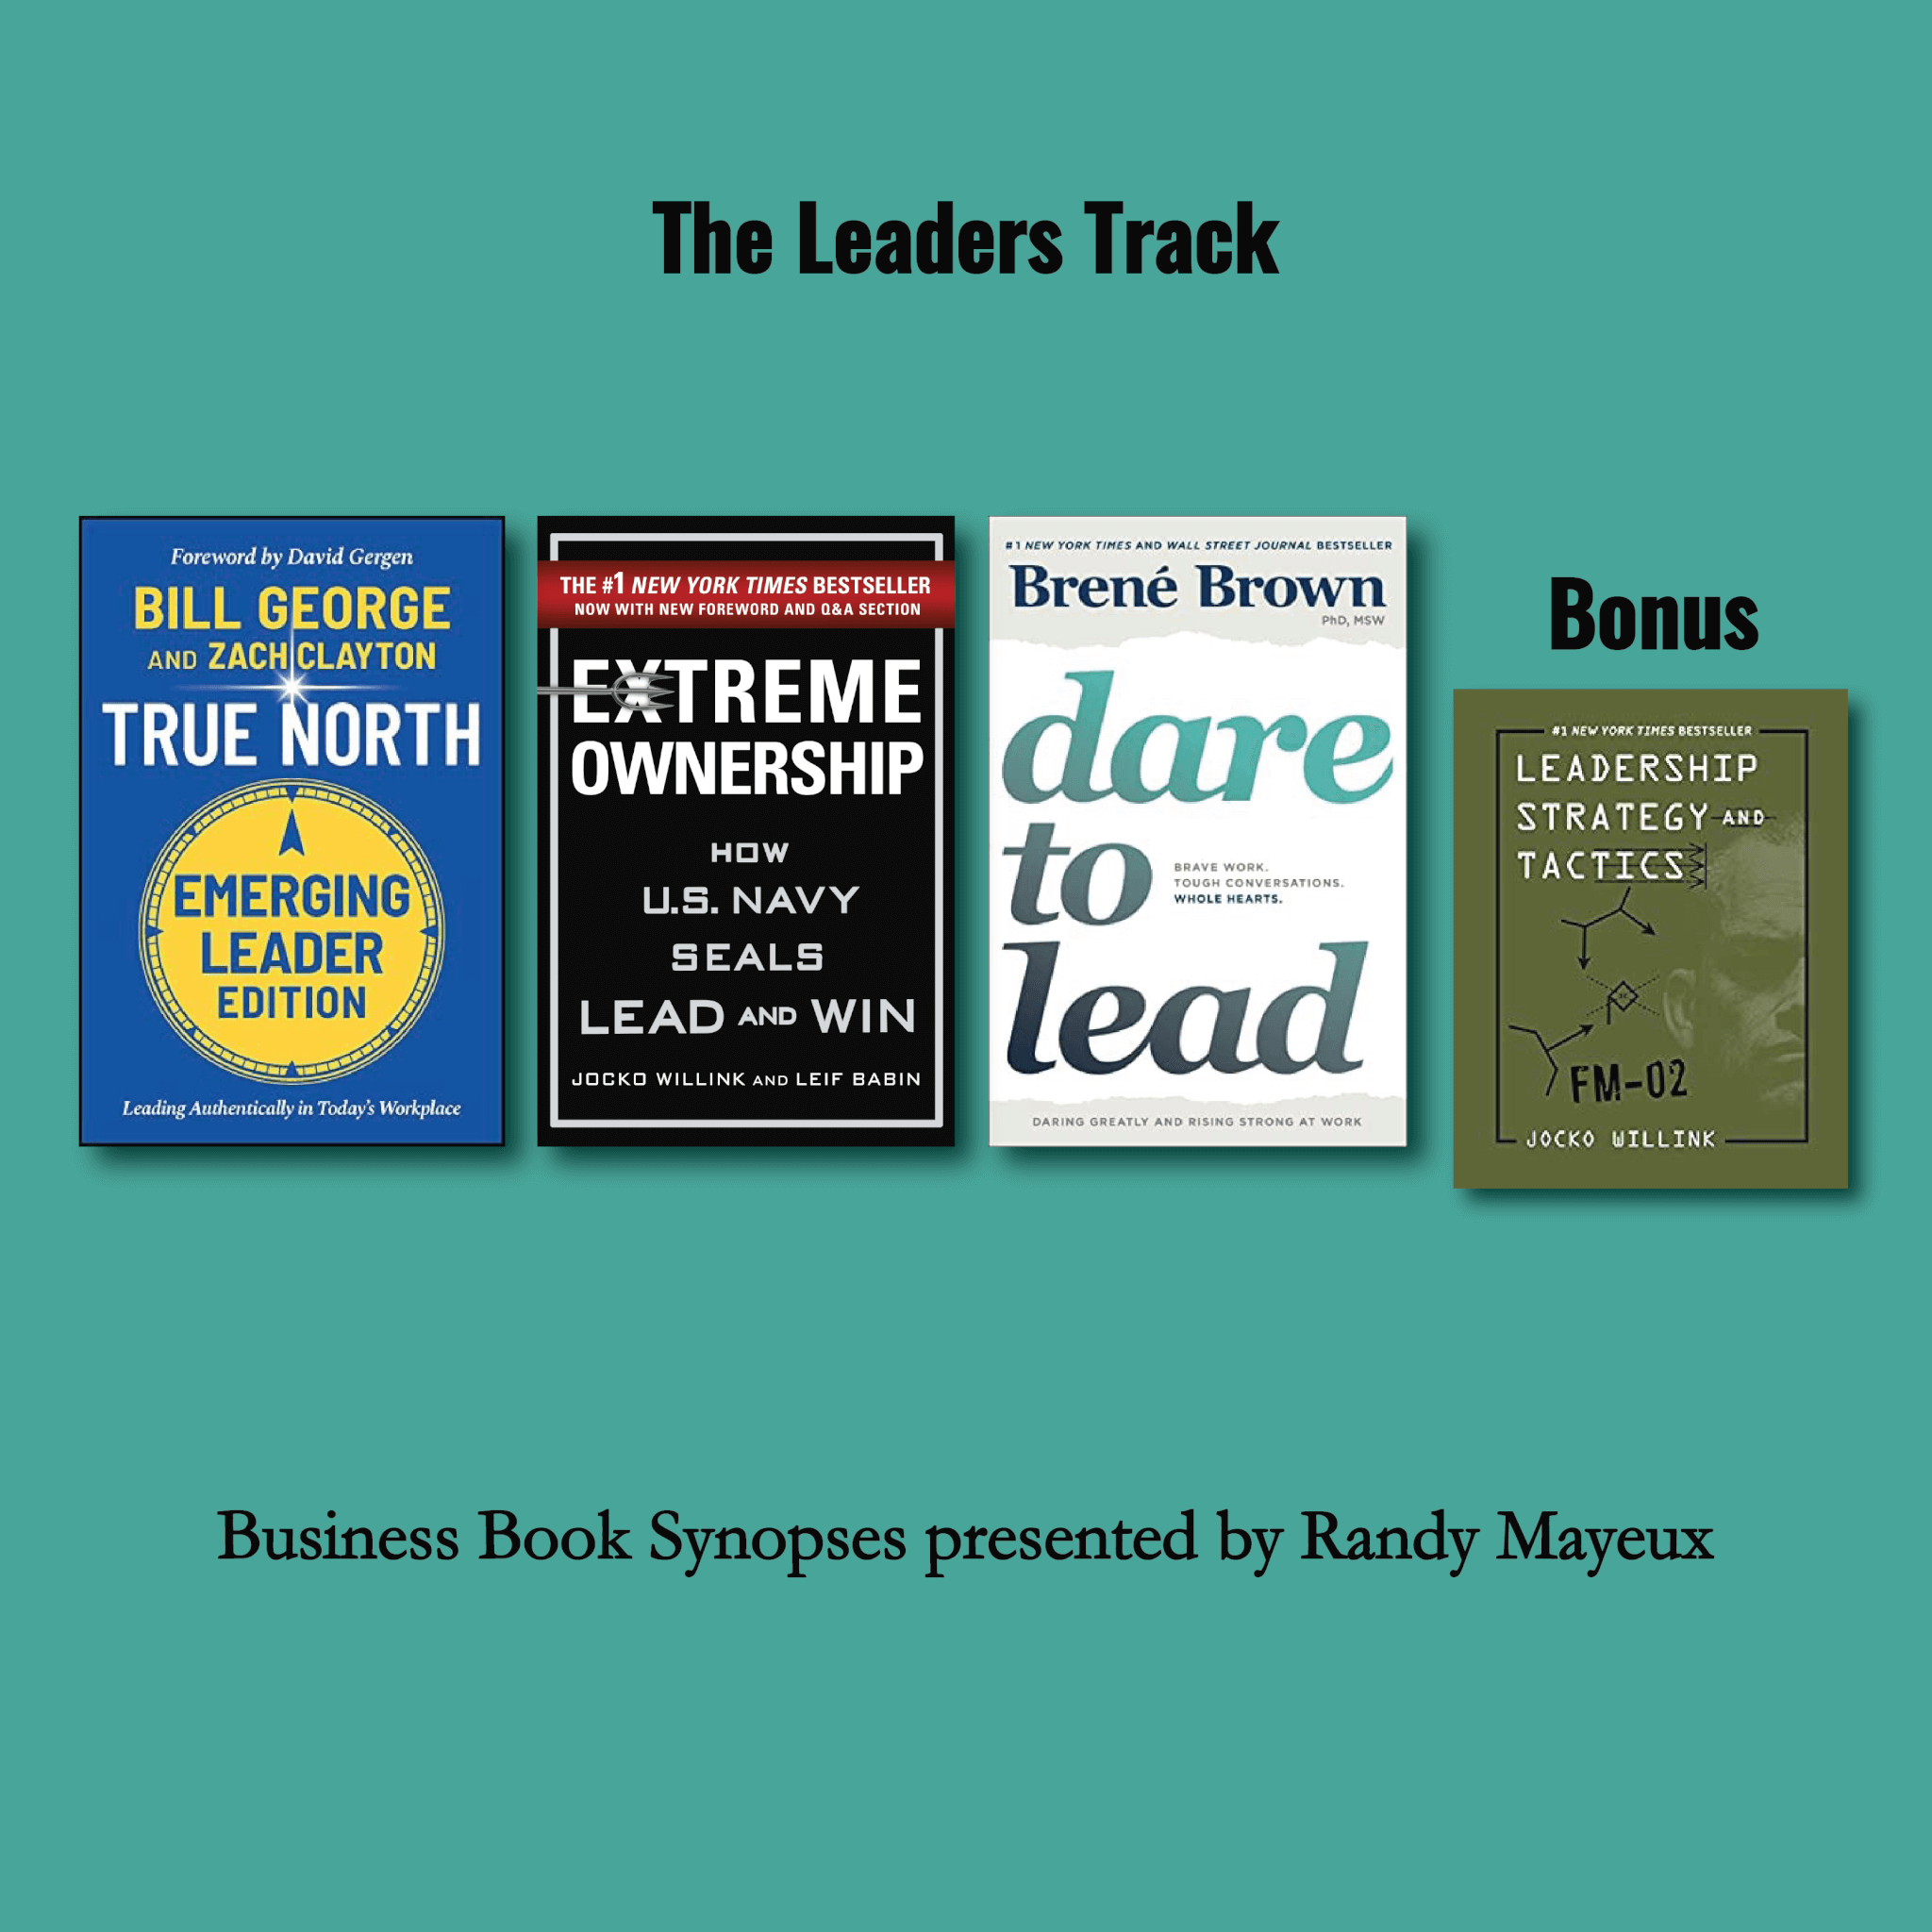 The Leaders Track; book cover images for #1 – "True North: Leading Authentically in Today's Workplace, Emerging Leader Edition" by Bill George, Zach Clayton #2 – "Extreme Ownership: How U.S. Navy SEALs Lead and Win" by Jocko Willink #3 – "Dare to Lead: Brave Work. Tough Conversations. Whole Hearts" by Brené Brown Bonus: "Leadership Strategy and Tactics: Field Manual" by Jocko Willink